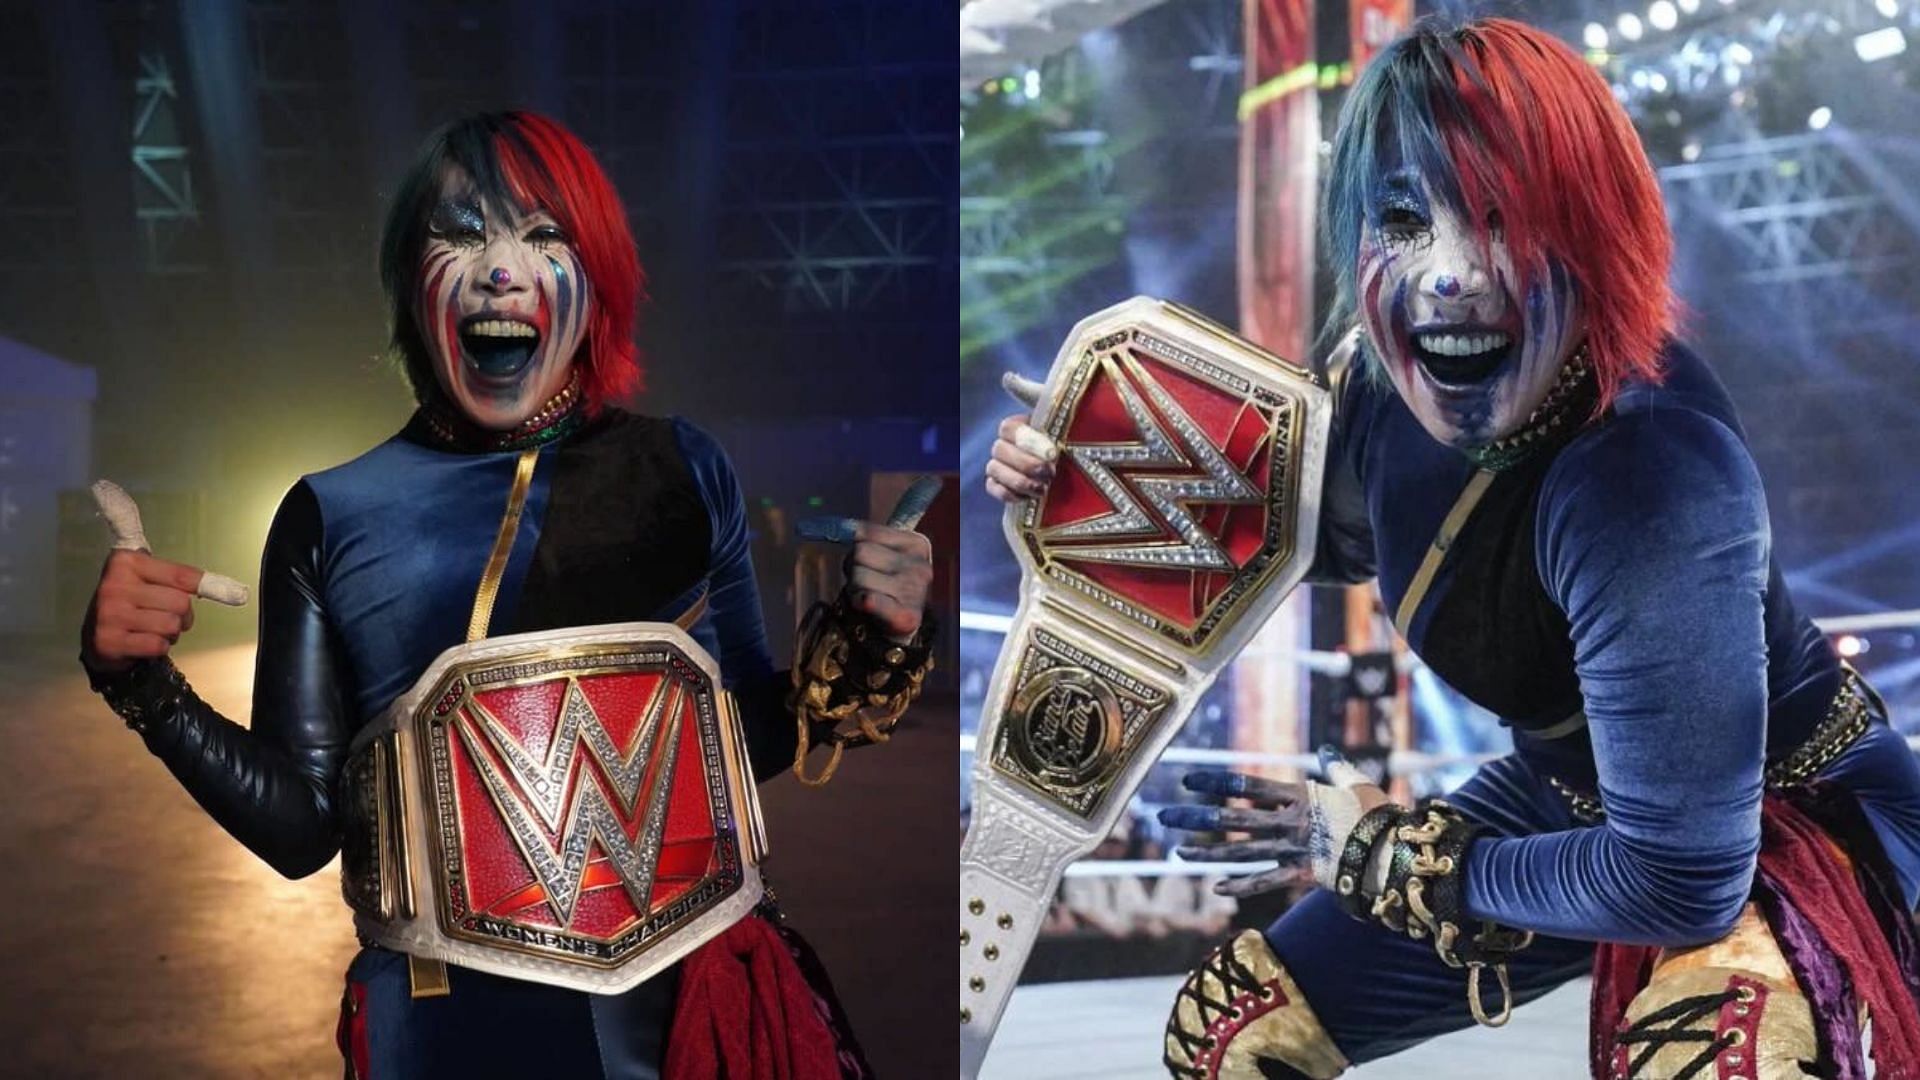 Asuka is the new RAW Women